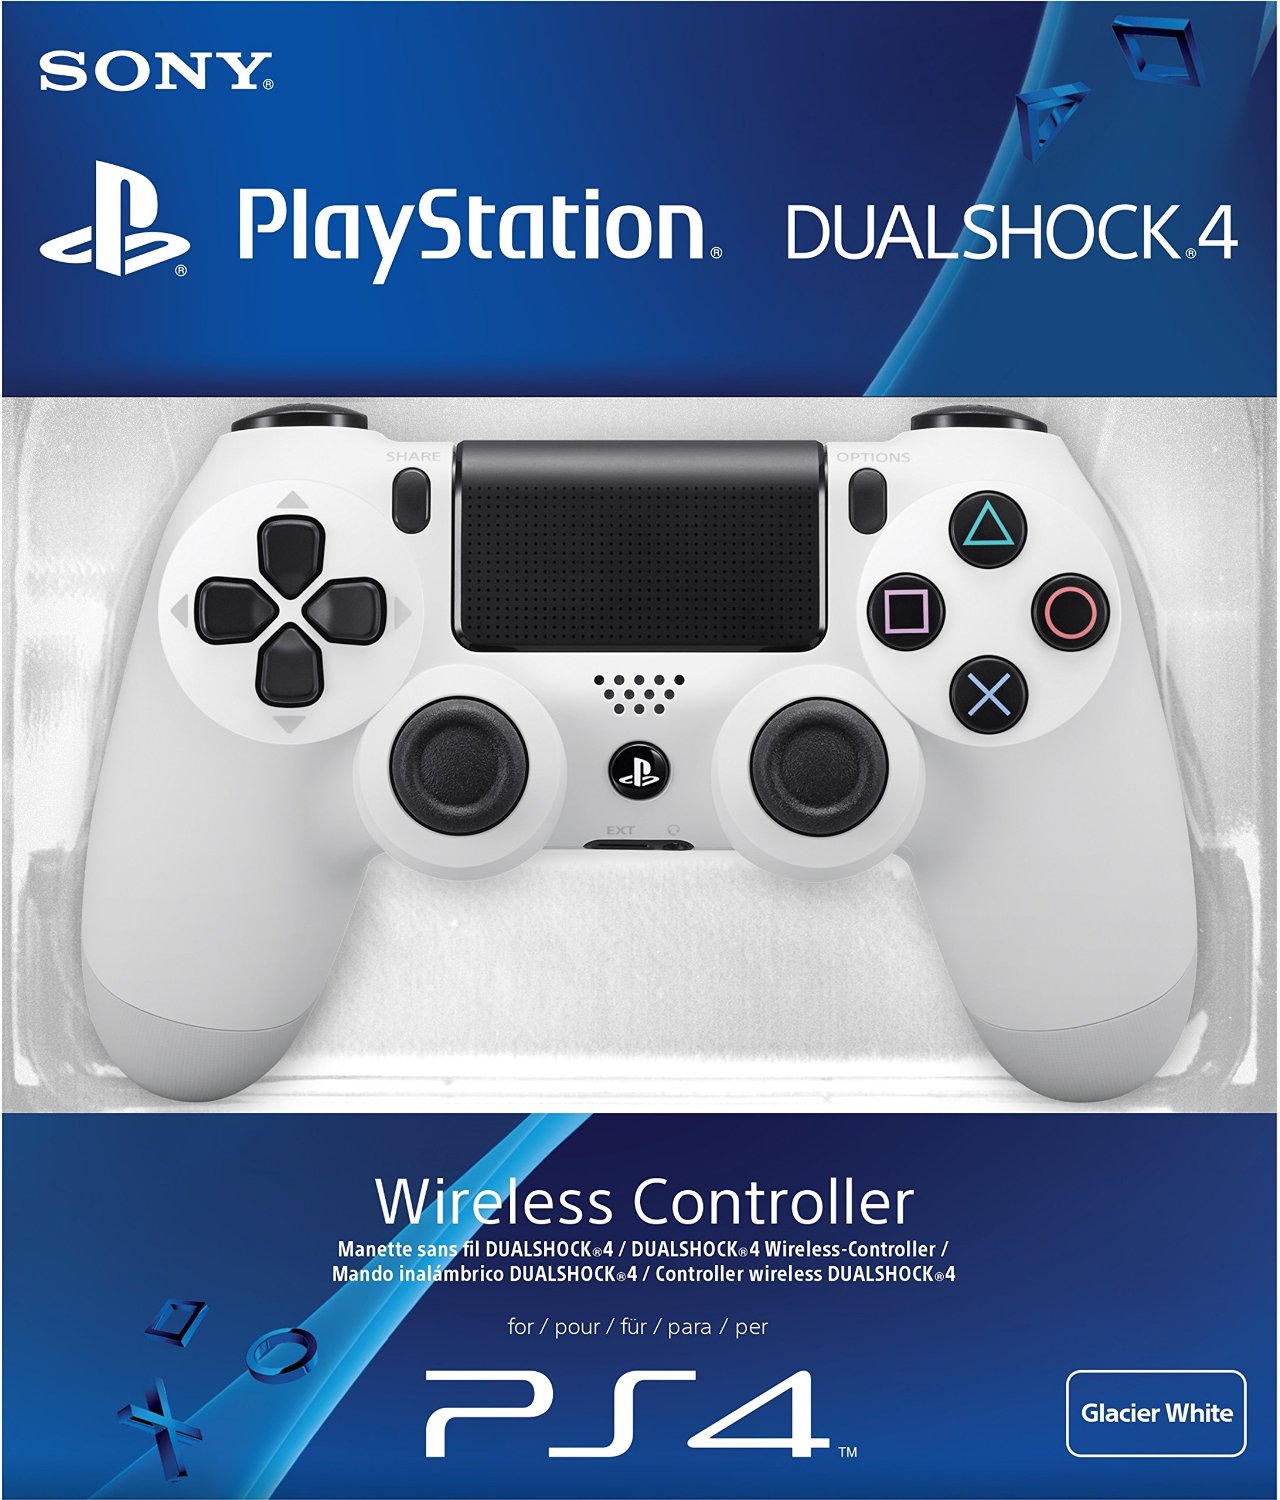 DualShock 4 Wireless Controller for PlayStation 4 Glacier White